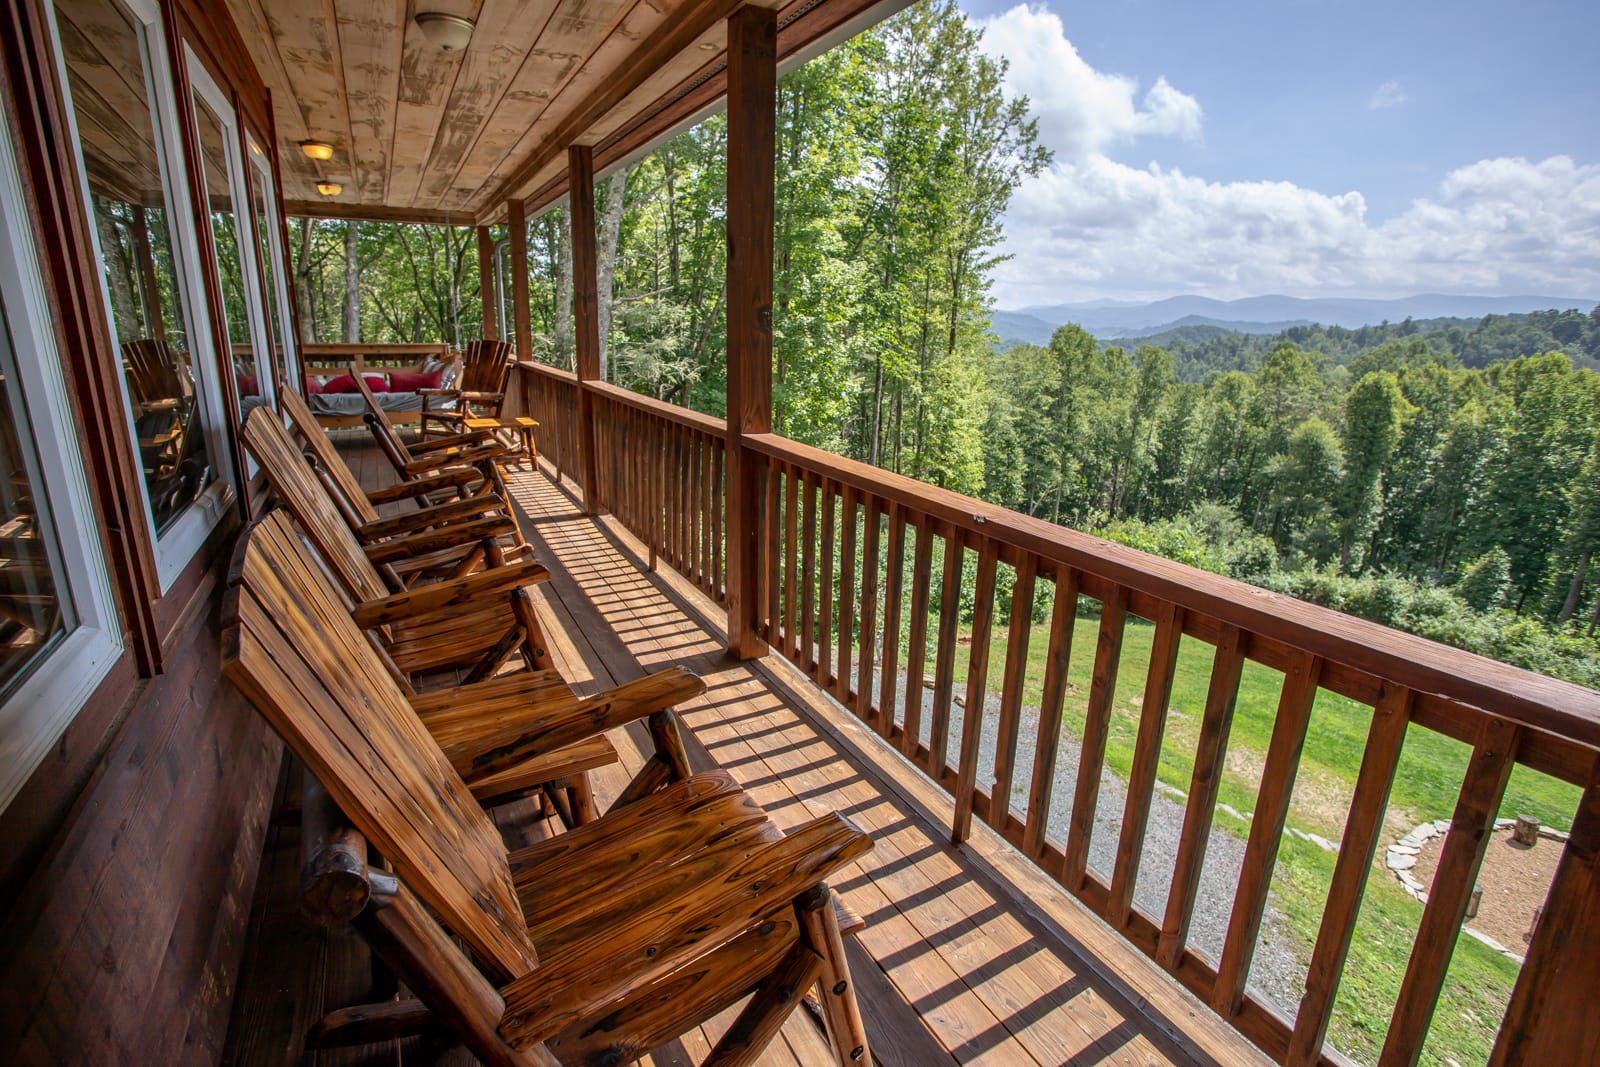 Classic Rocking Chairs on the Covered Deck Overlooking Long-Range Mountain Views